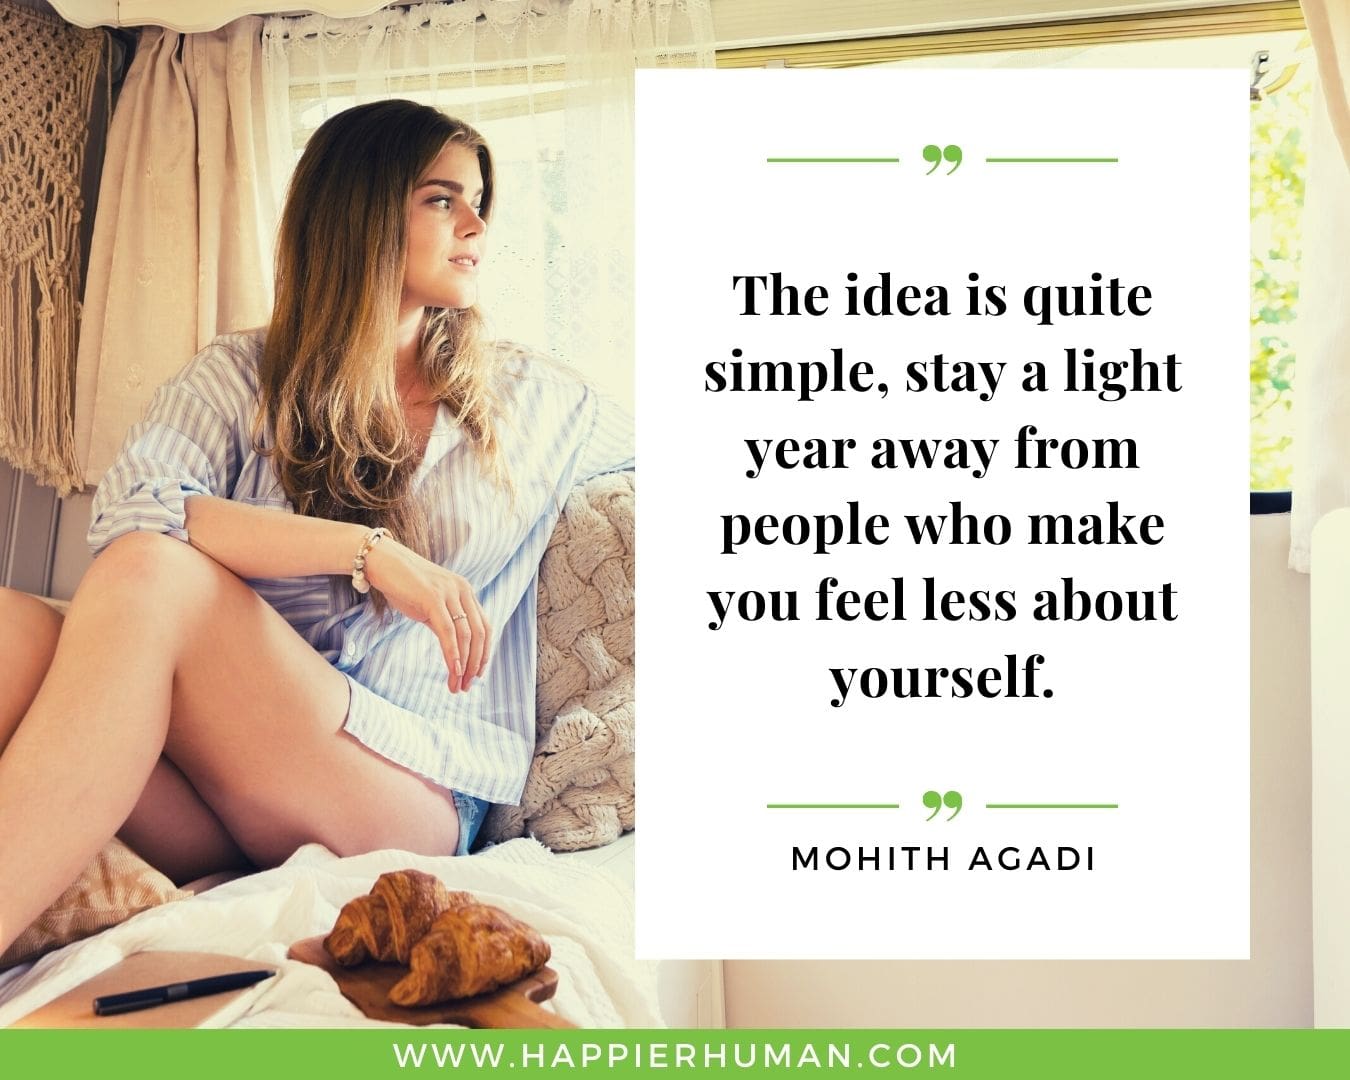 Toxic People Quotes - “The idea is quite simple, stay a light year away from people who make you feel less about yourself.” – Mohith Agadi